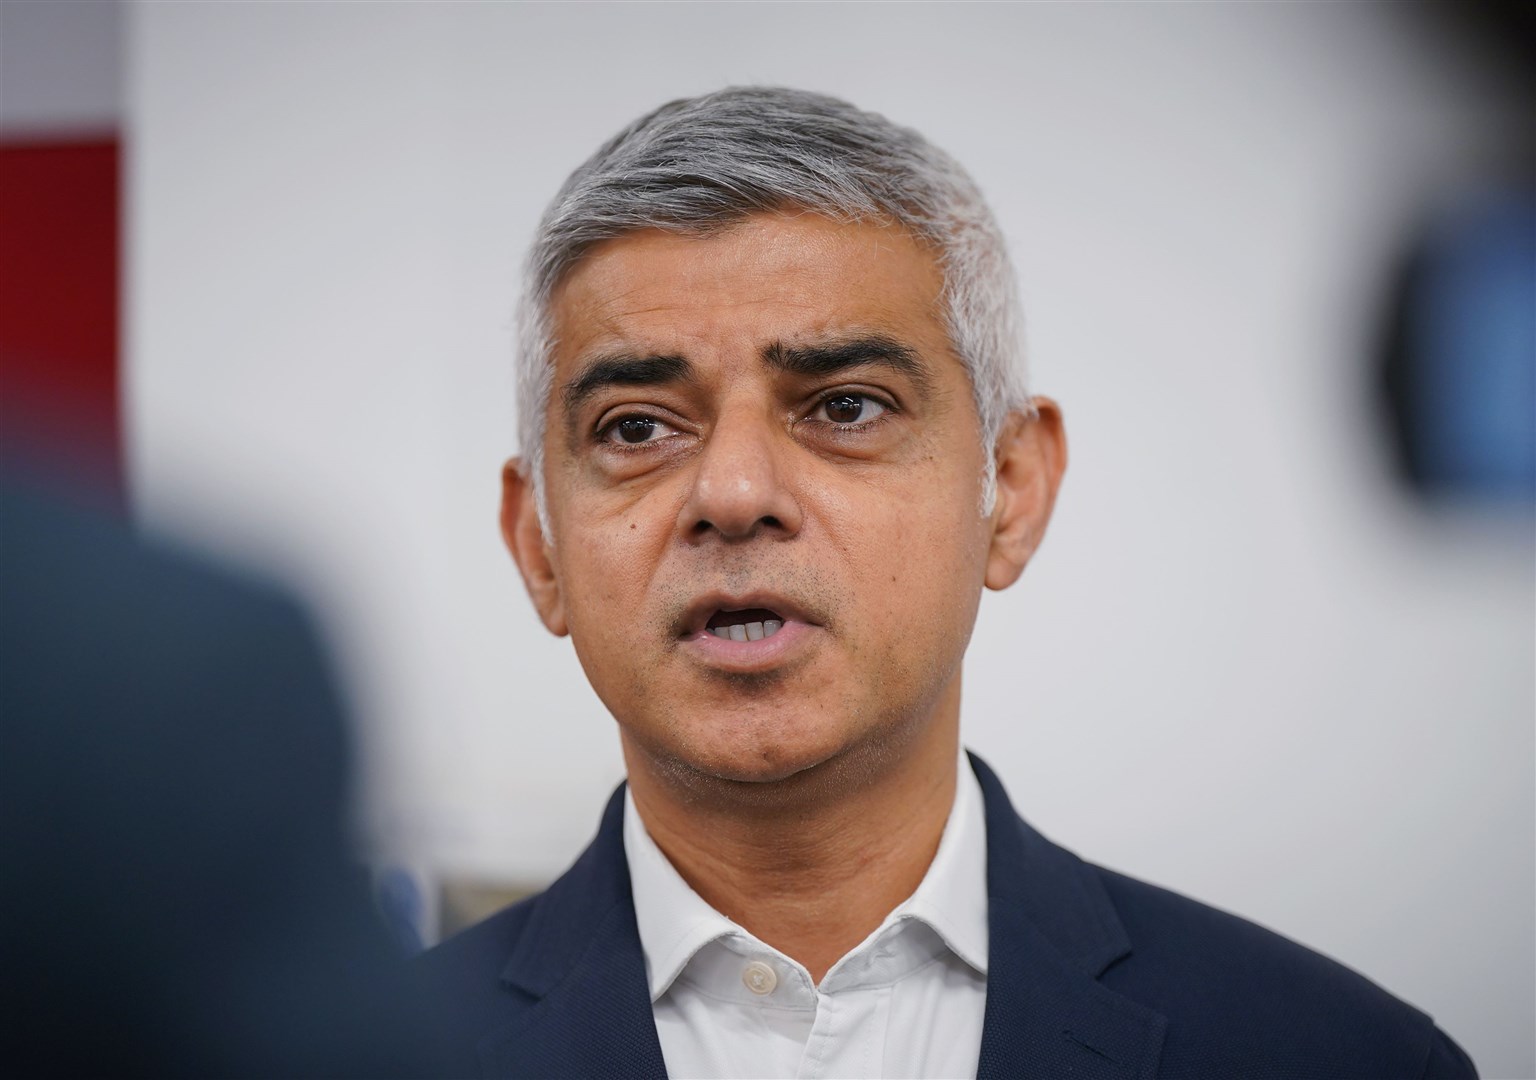 Mayor of London Sadiq Khan will appear before the Covid inquiry later (Yui Mok/PA)